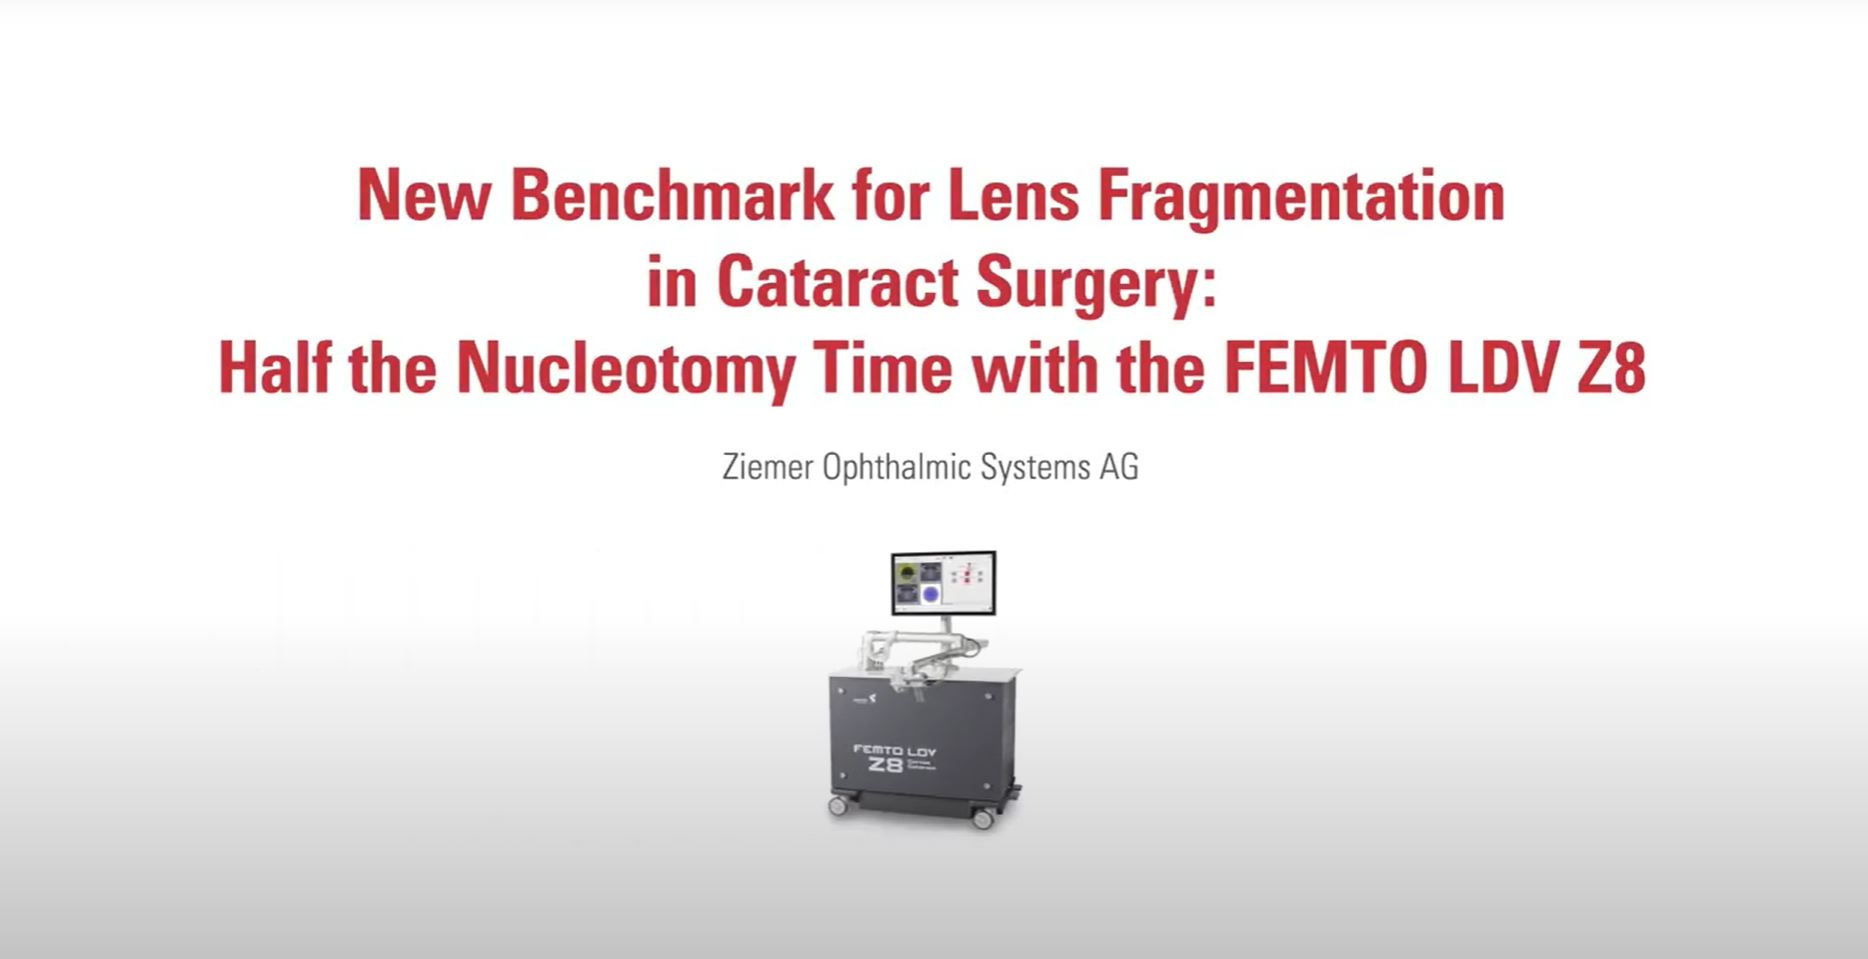 The updated Cataract software on FEMTO LDV Z8 sets a new benchmark for lens fragmentation in Cataract surgery. This video shows that by using this software on FEMTO LDV Z8, the time of the nucleotomy part can be reduced by half. 